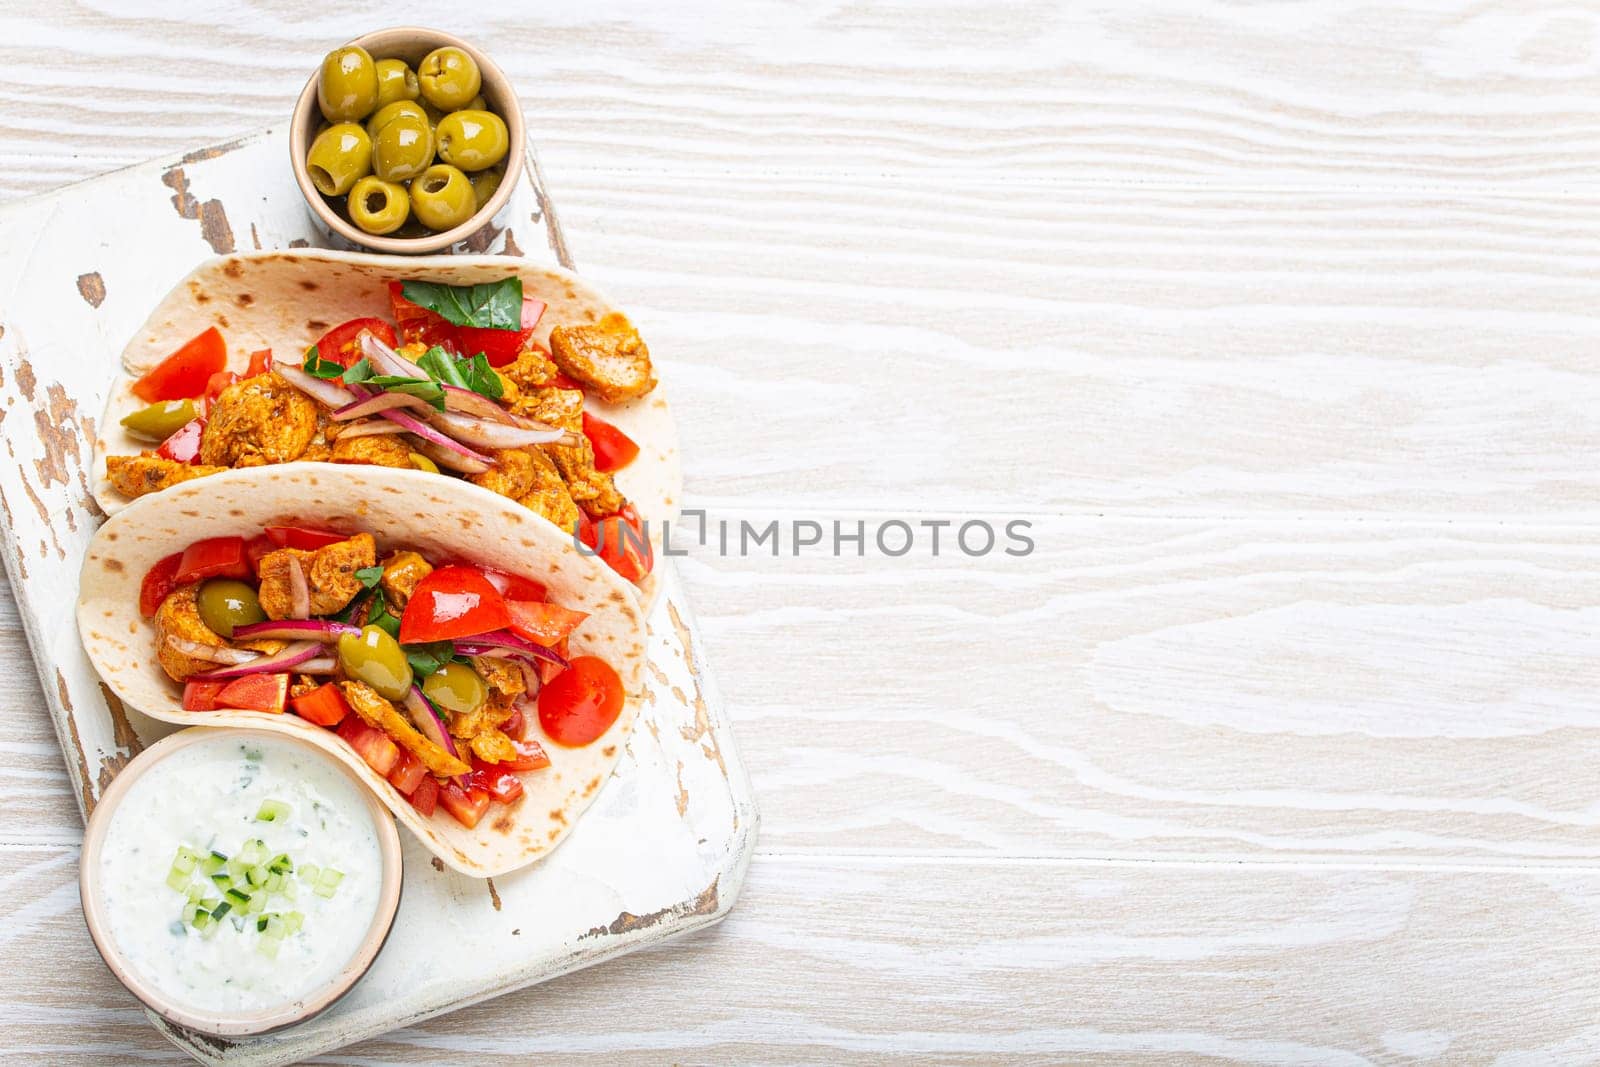 Traditional Greek Dish Gyros: Pita bread Wraps with vegetables, meat, herbs, olives on rustic wooden cutting board with Tzatziki sauce, olive oil top view on white wooden background, space for text. by its_al_dente